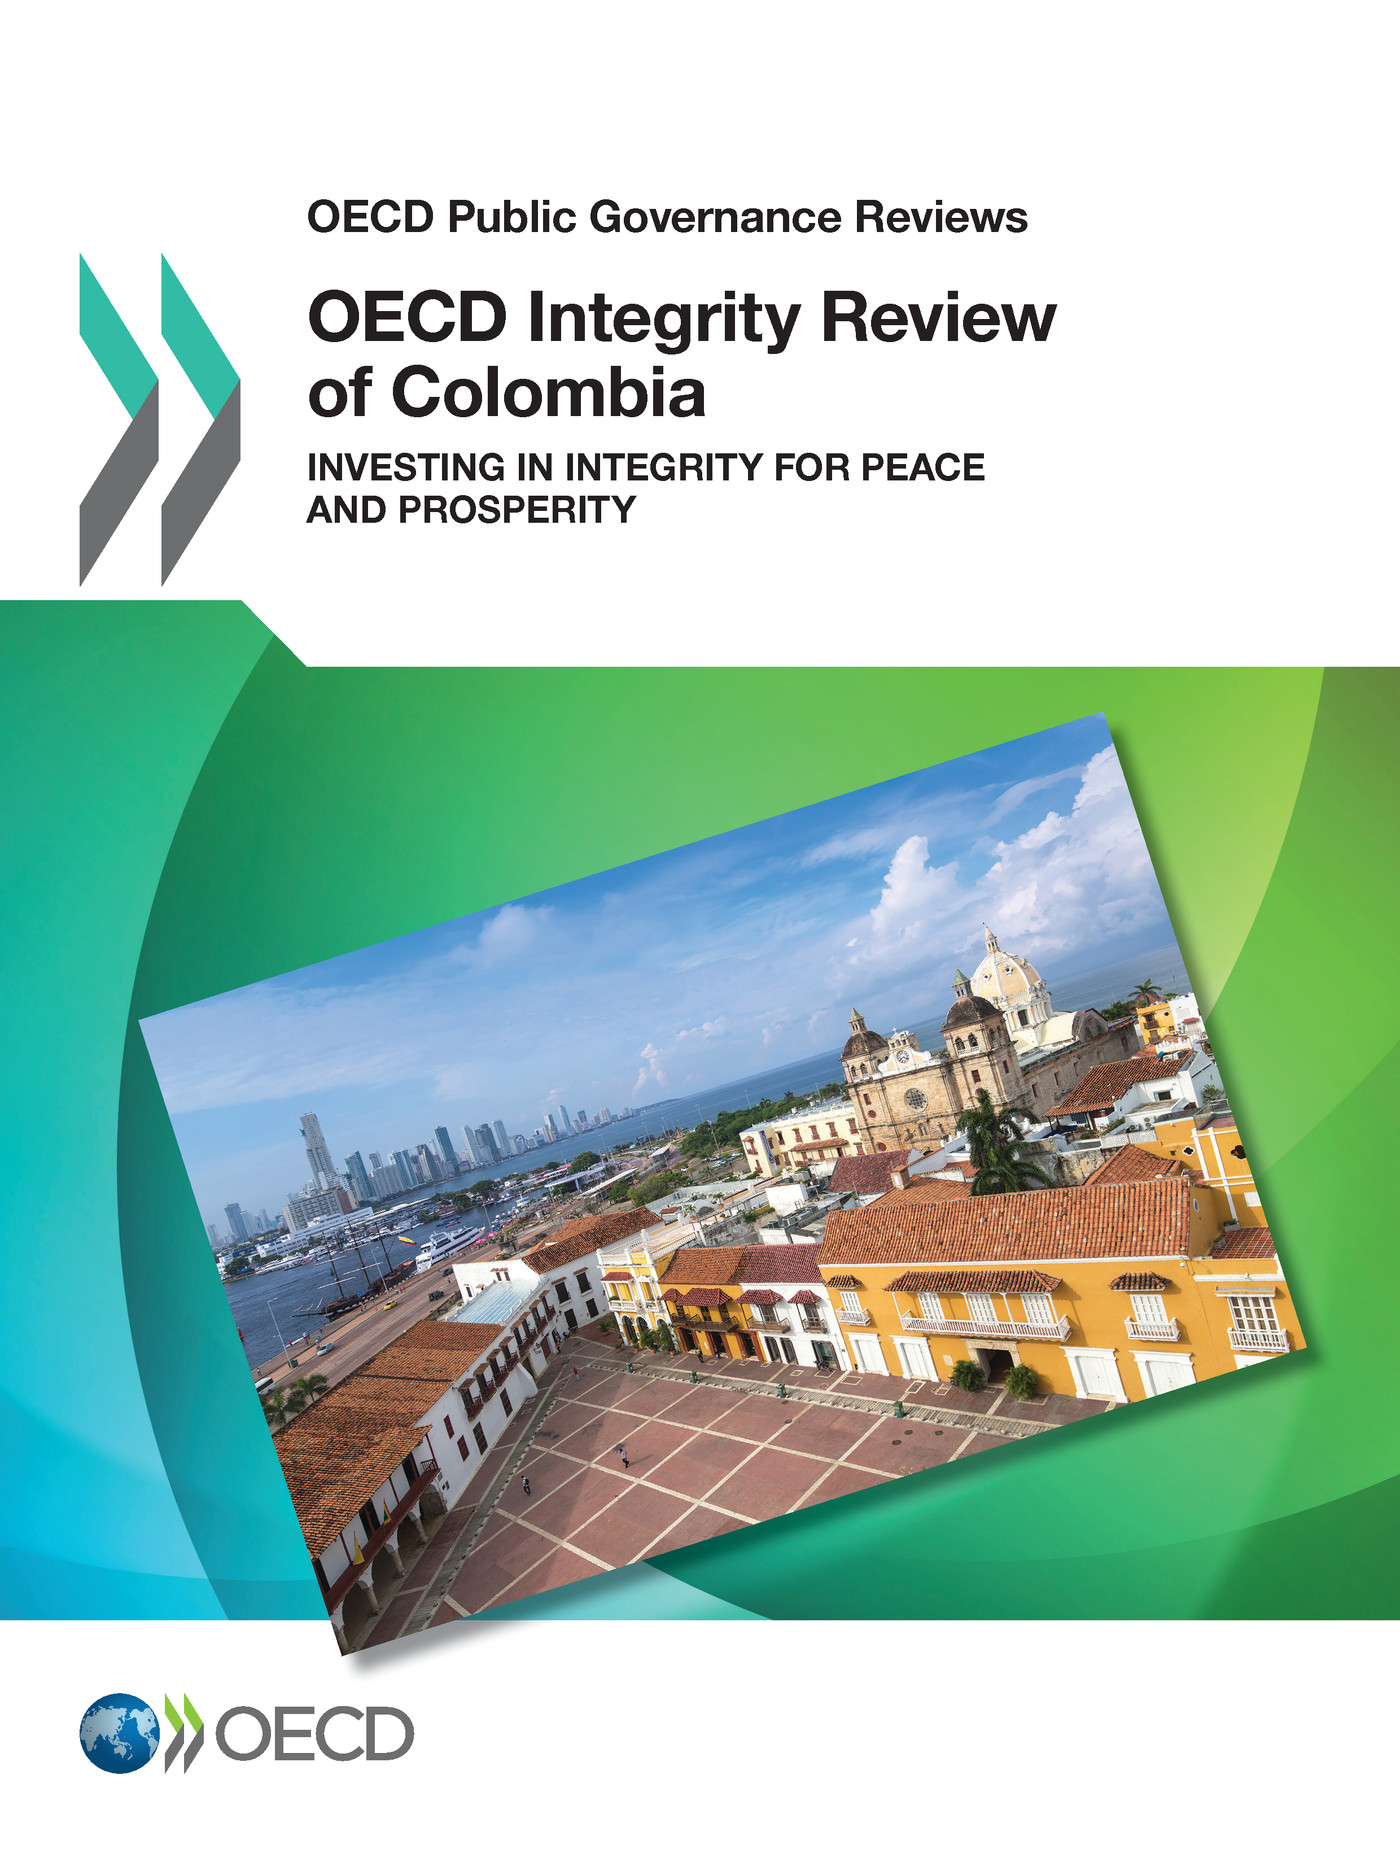 OECD Integrity Review of Colombia -  Collectif - OCDE / OECD